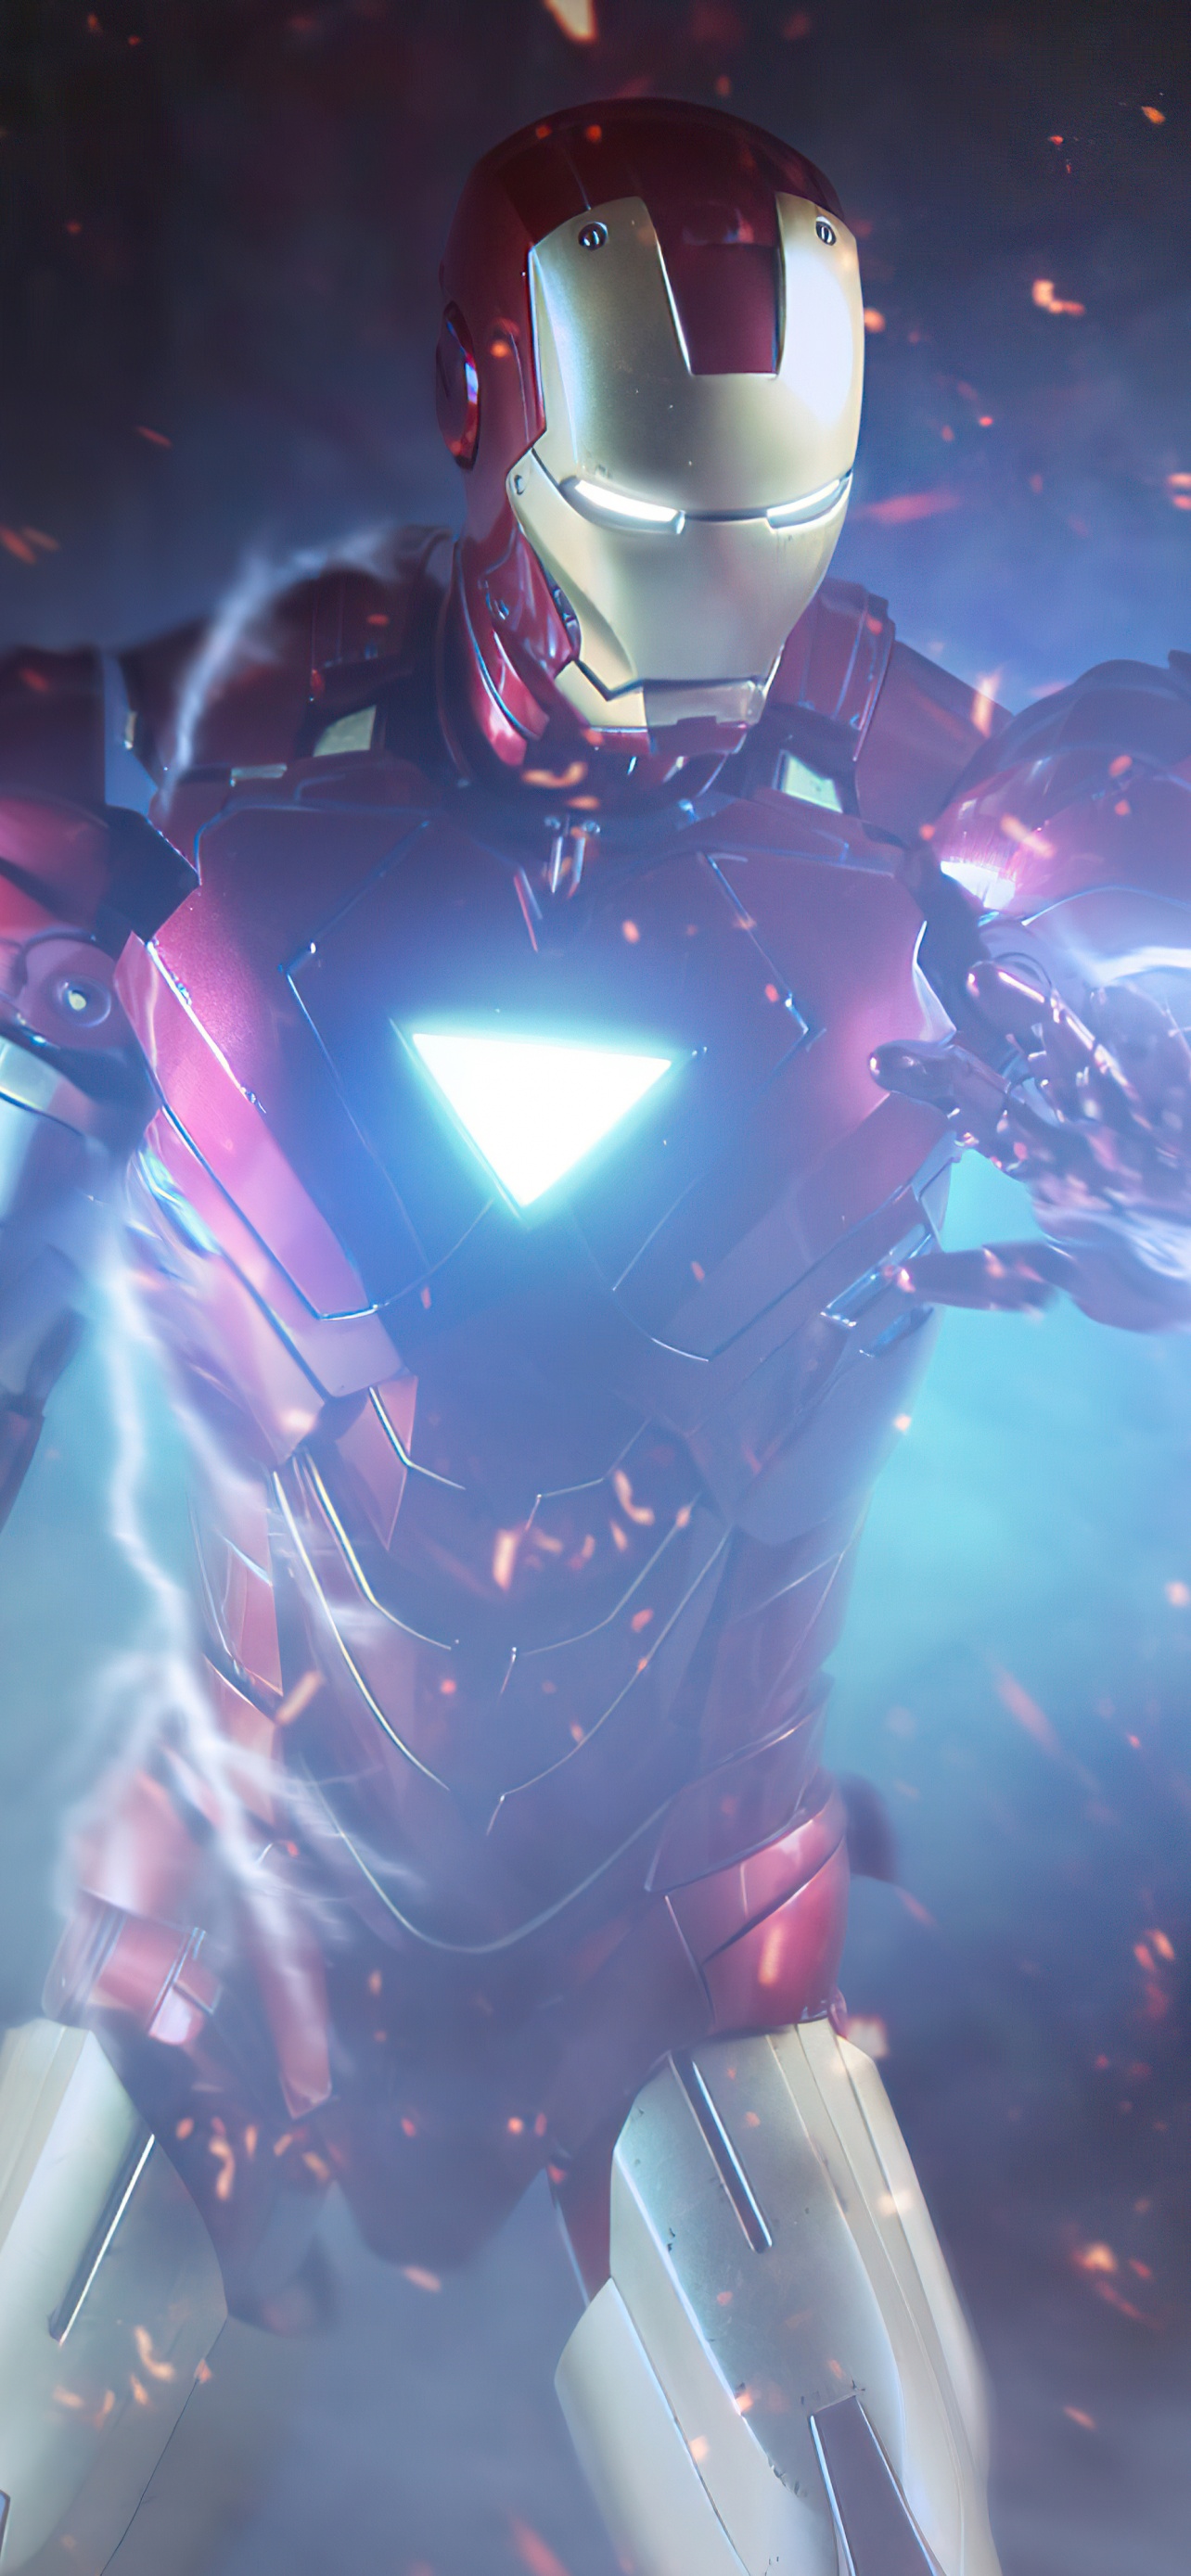 Avengers Age of Ultron Iron Man Captain America Hu iPhone Wallpapers  Free Download